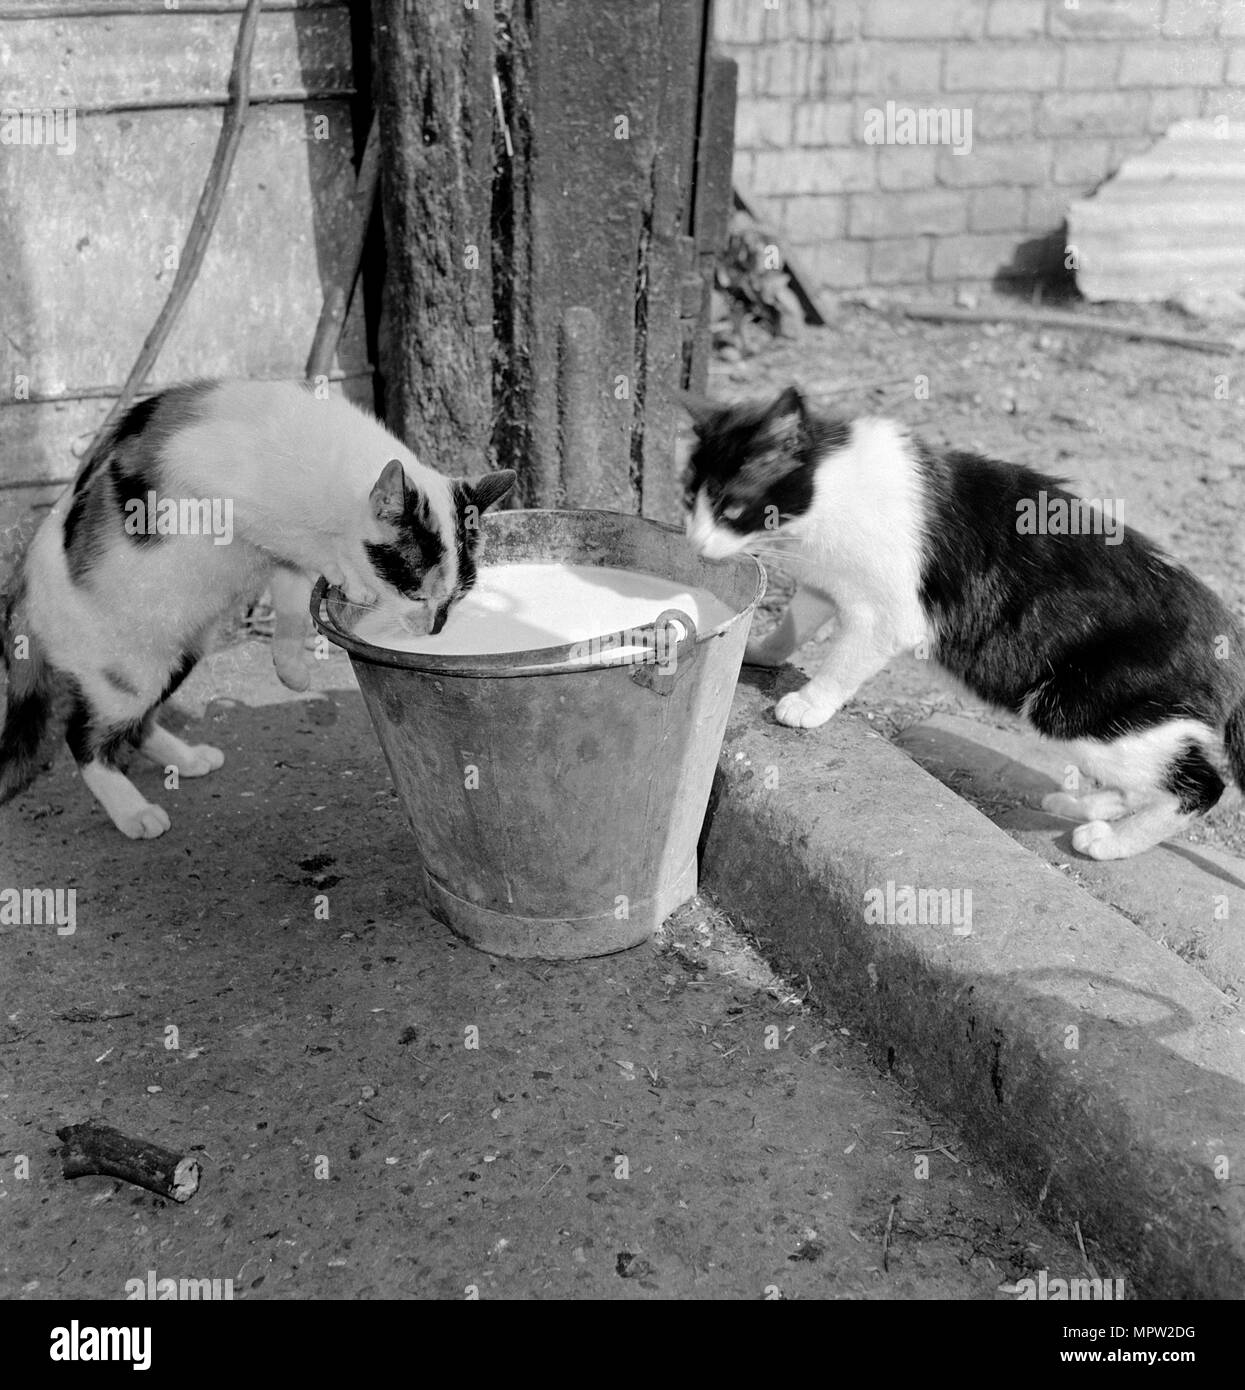 Two cats drinking from a pail of milk, Hertfordshire, 1950s-1960s. Artist: John Gay. Stock Photo